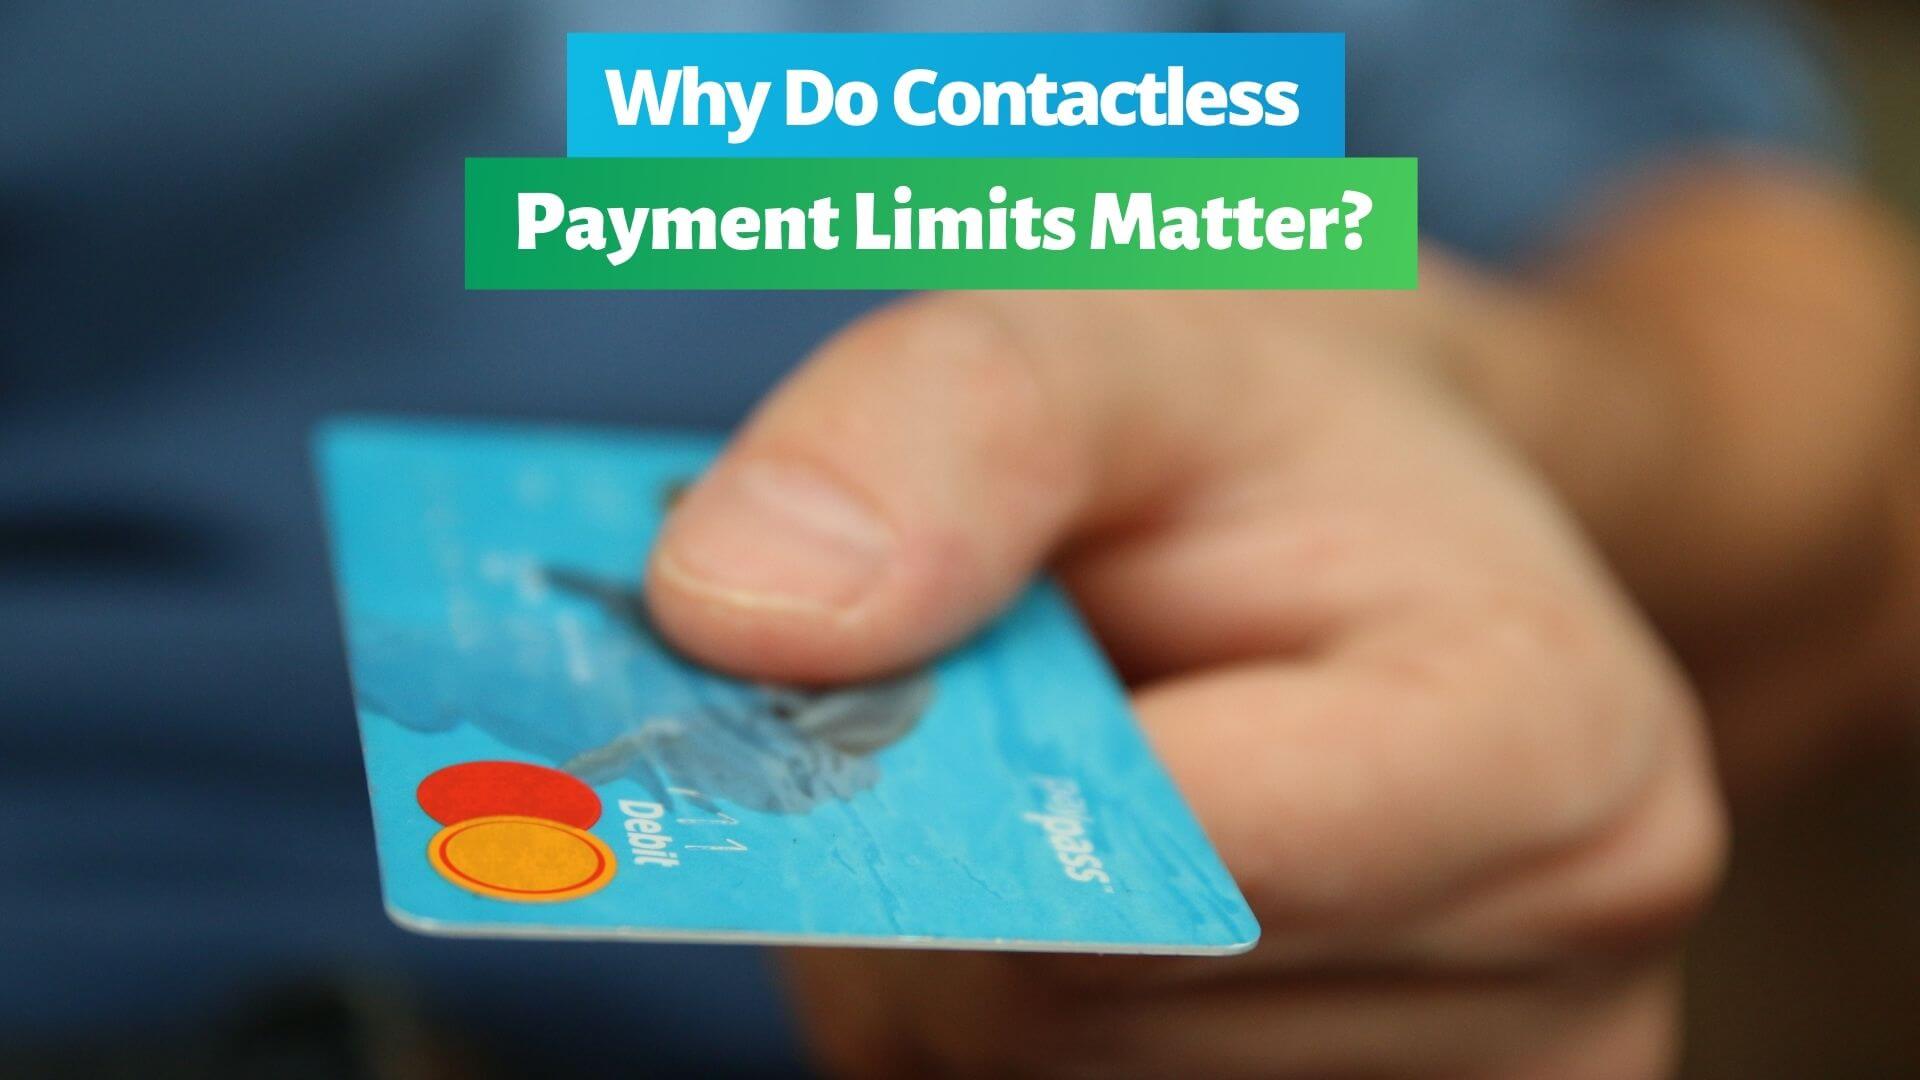 Why do contactless payment limits matter for businesses and consumers? Here's everything you need to know about contactless limits.